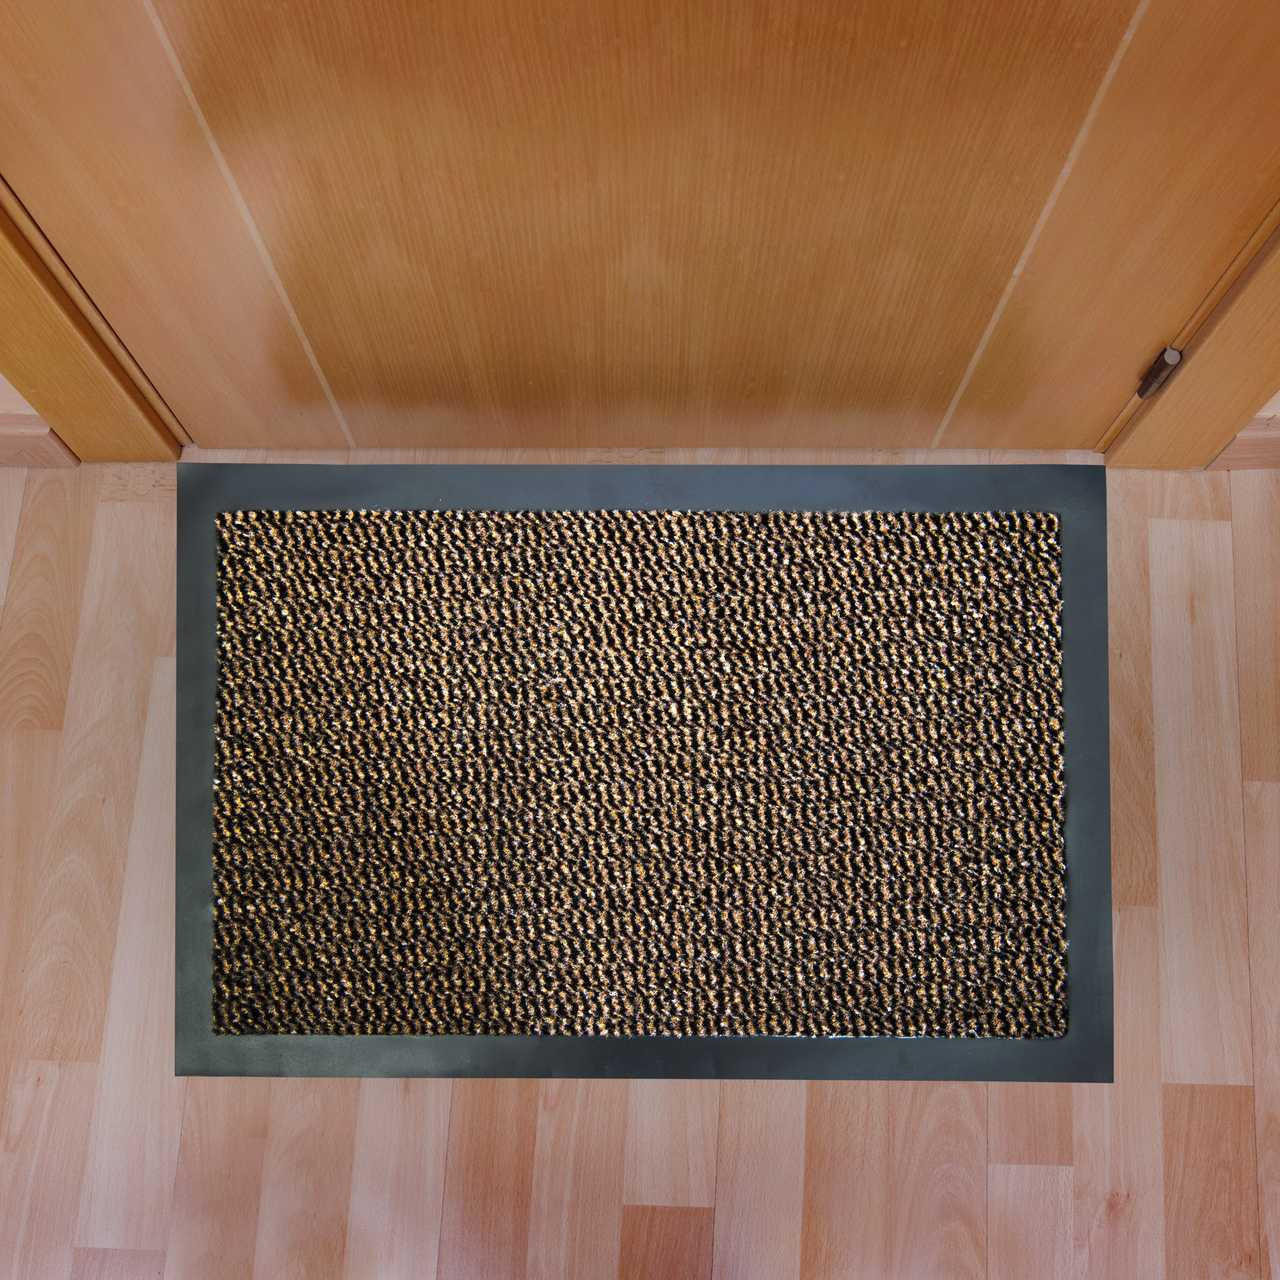 https://cdn11.bigcommerce.com/s-fjwps1jbkv/images/stencil/1280x1280/products/145/3872/ultralux-indoor-entrance-mat-or-polypropylene-fibers-and-anti-slip-vinyl-backed-entry-rug-doormat-or-brown__77036.1689078820.jpg?c=2?imbypass=on